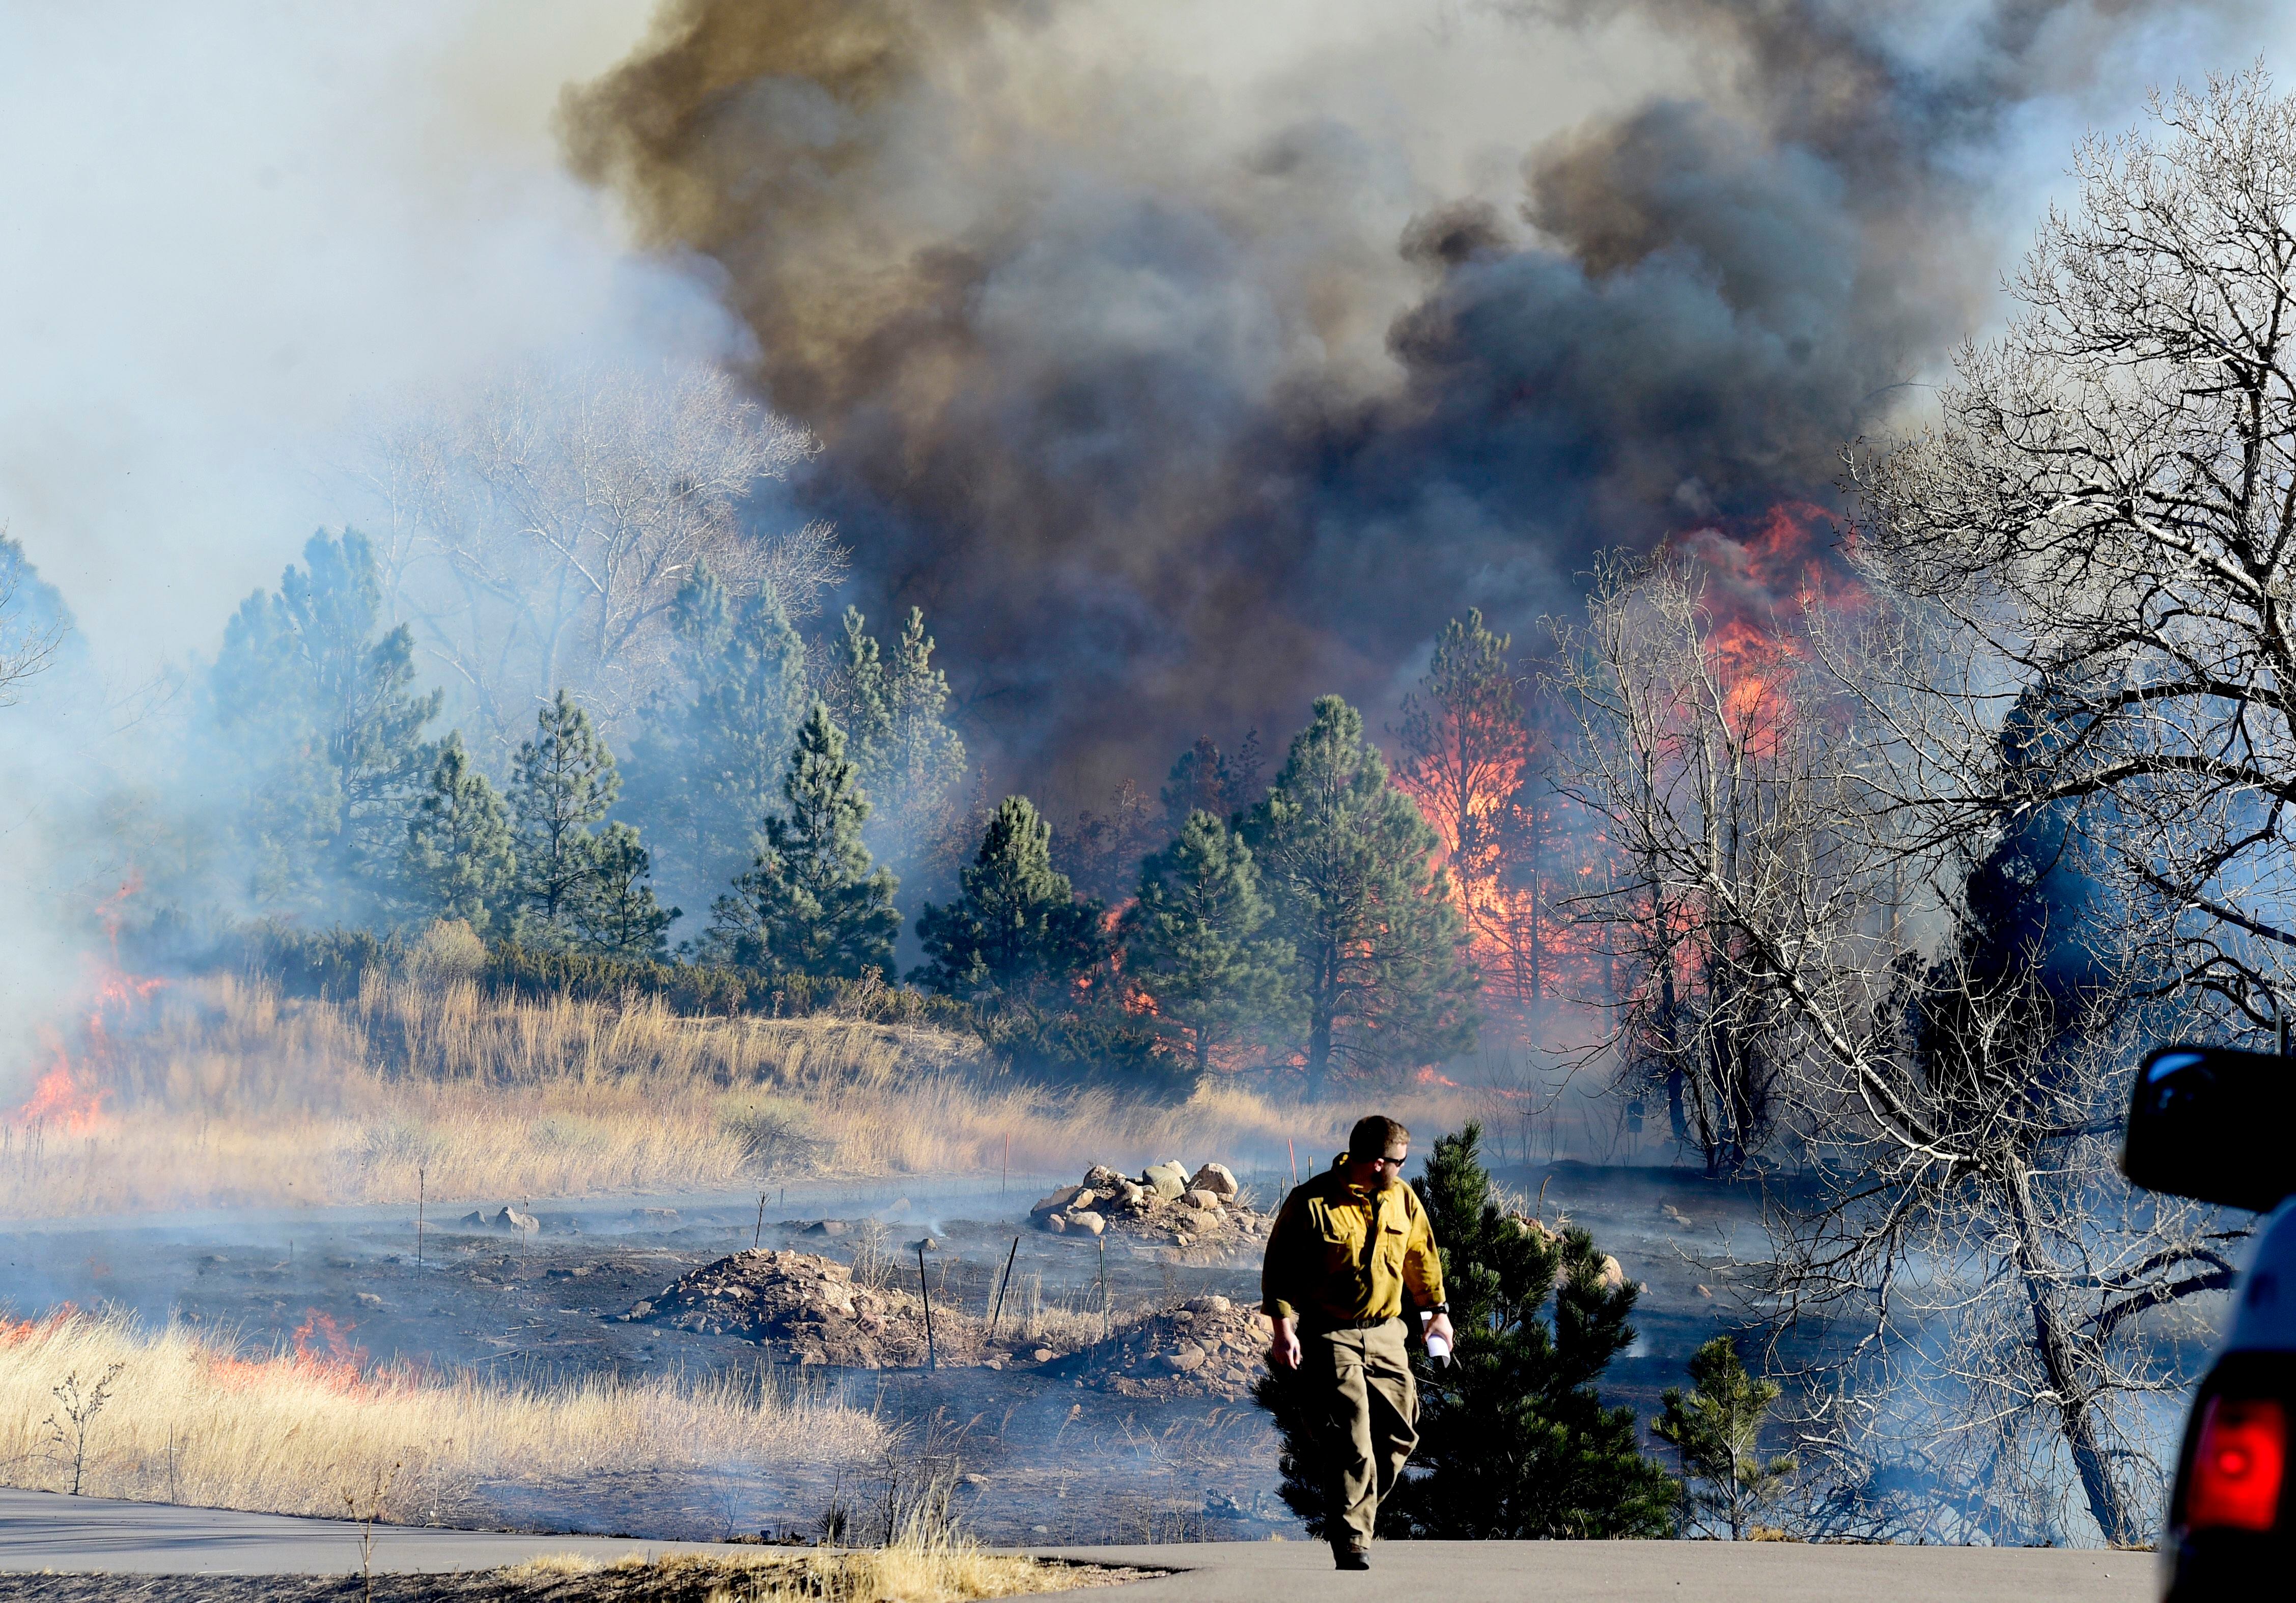 (Cliff Grassmick | Daily Camera via AP) A firefighter walks up a road near a home at Middle Fork Road and Foothills Highway north of Boulder, Colo., on Thursday, Dec. 30, 2021.